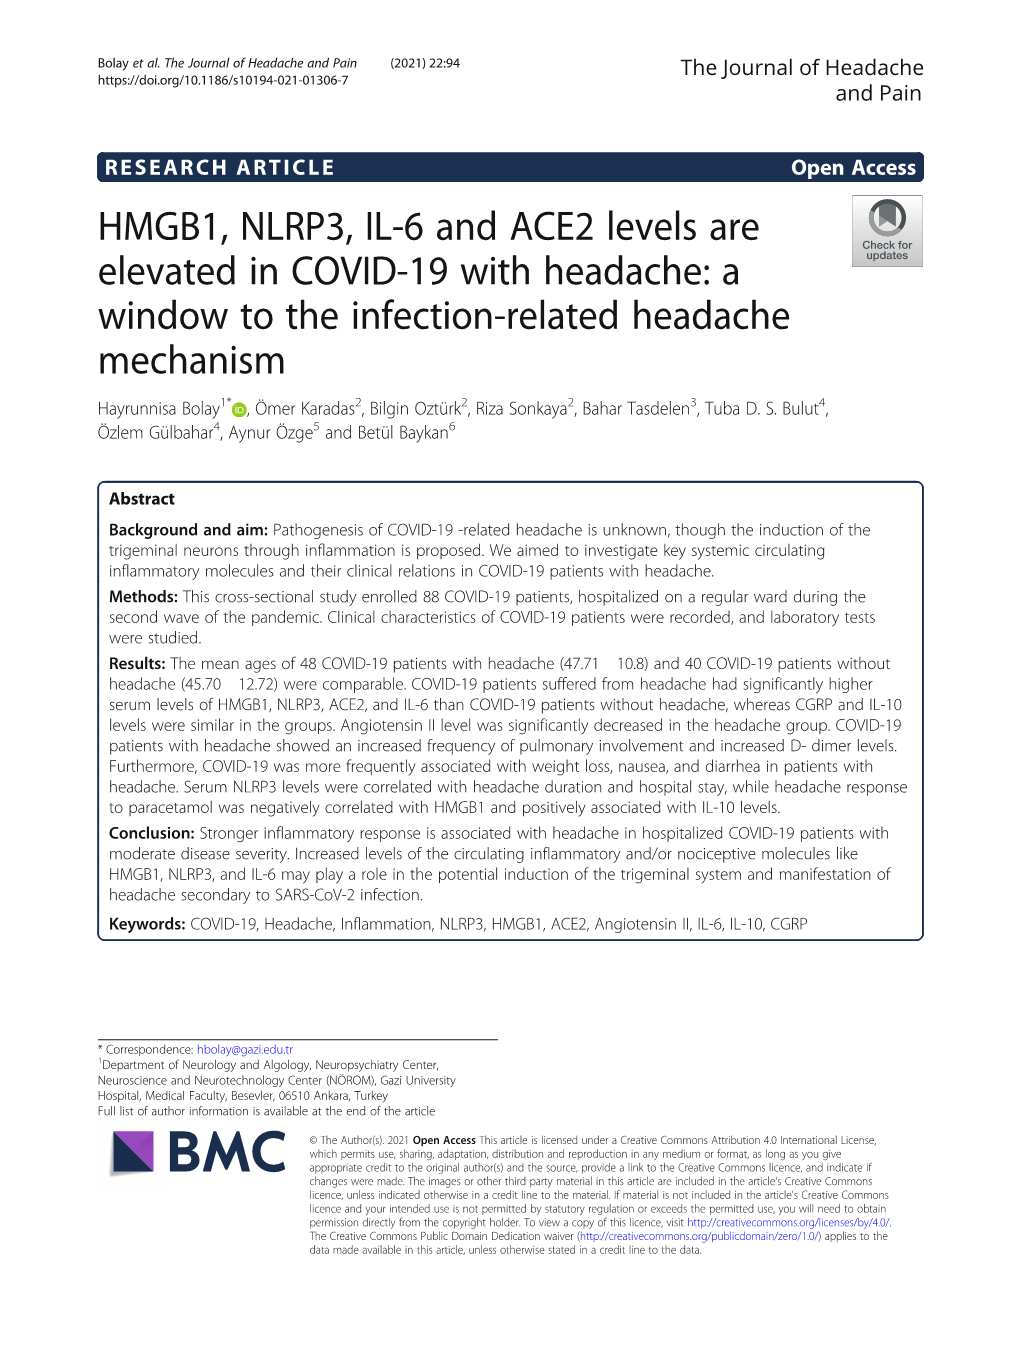 HMGB1, NLRP3, IL-6 and ACE2 Levels Are Elevated in COVID-19 with Headache